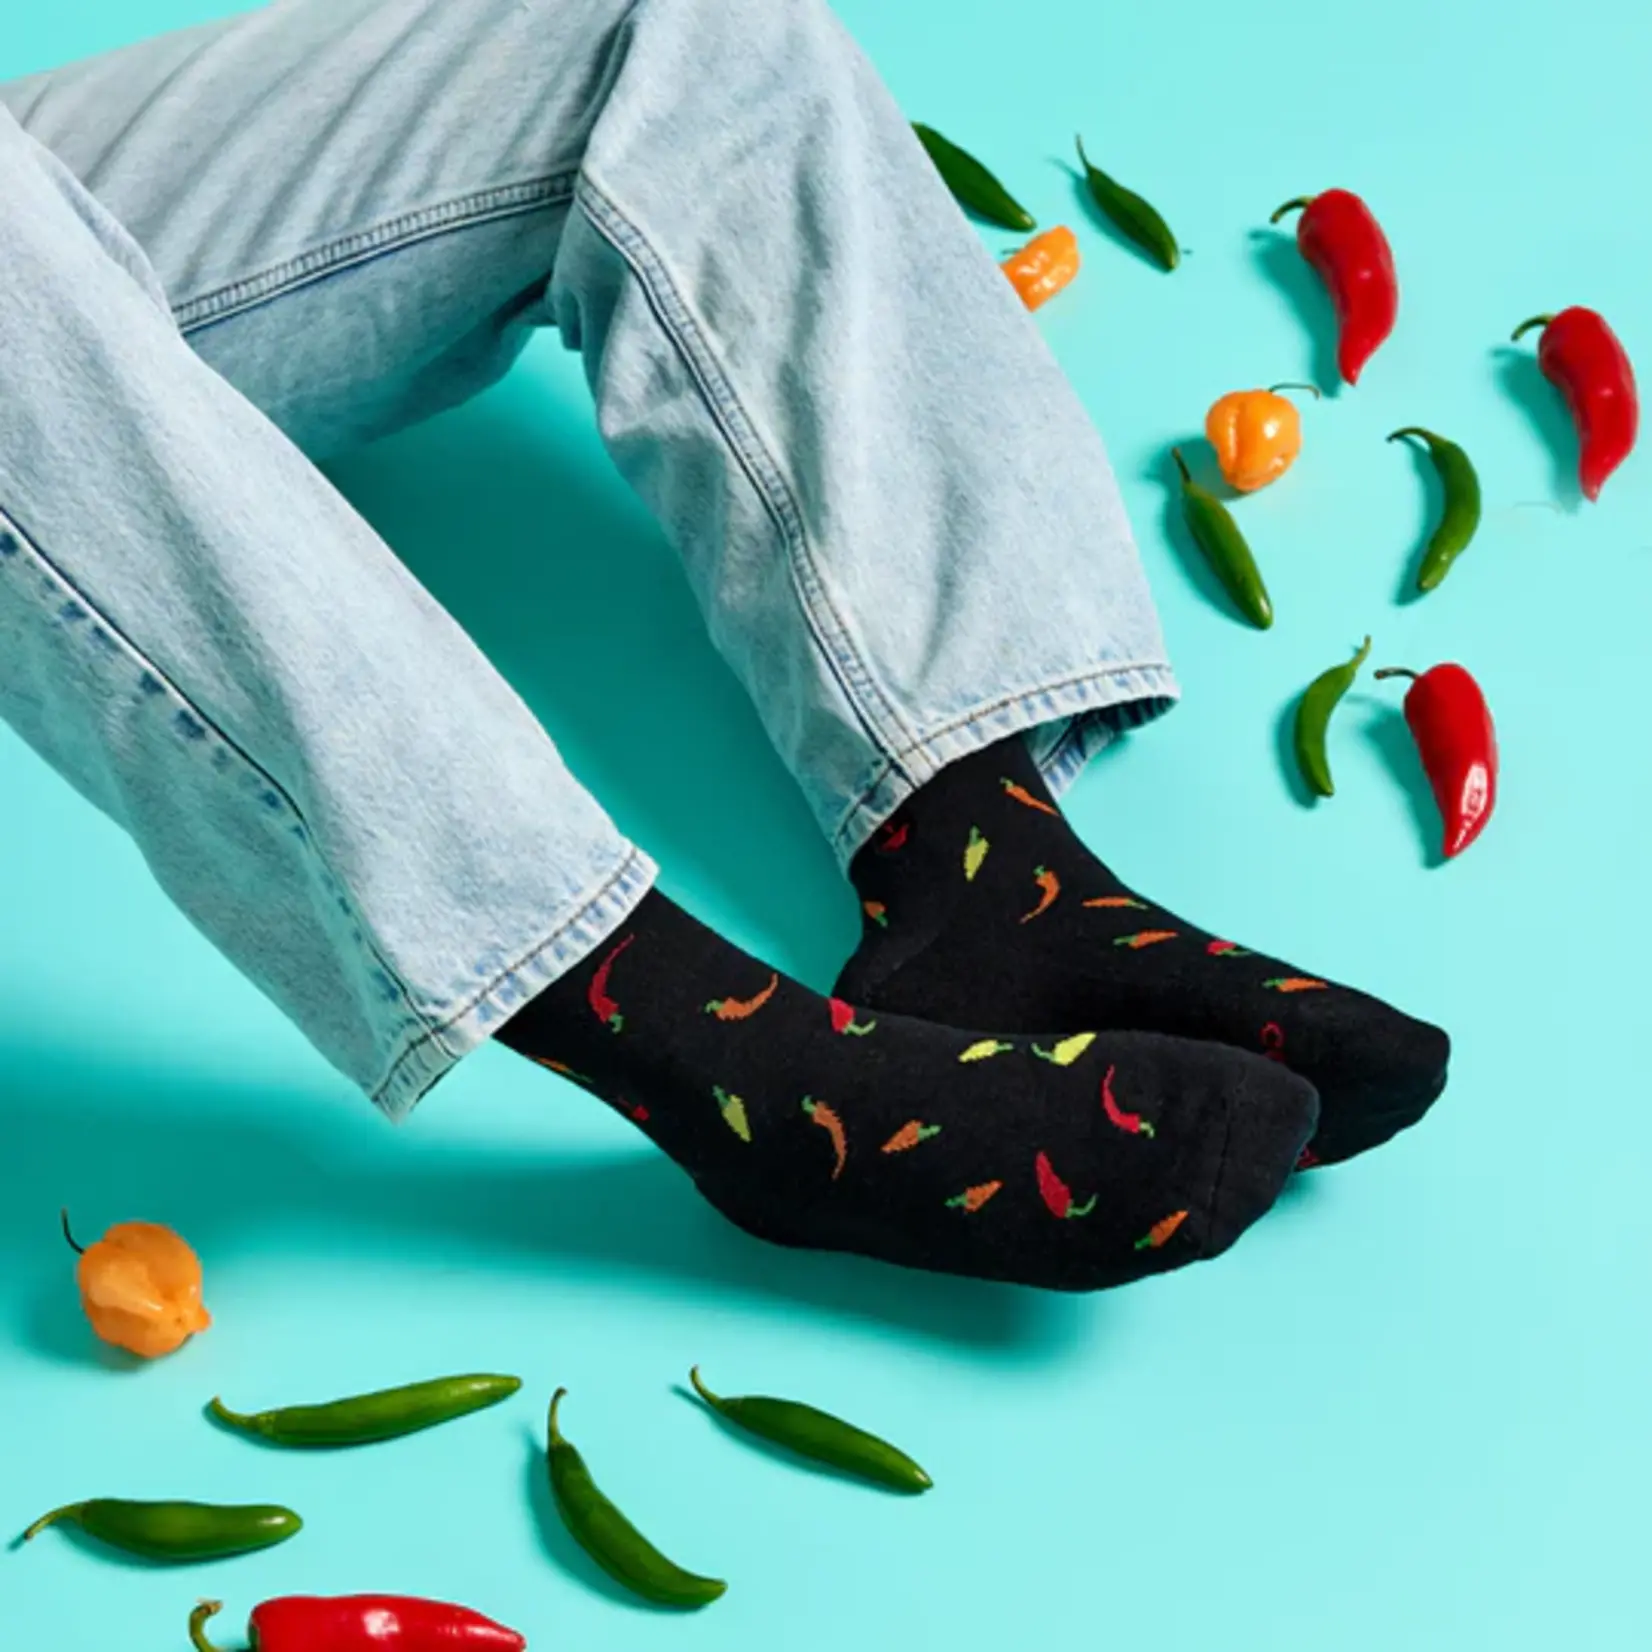 Conscious Step Socks that Provide Meals | Small